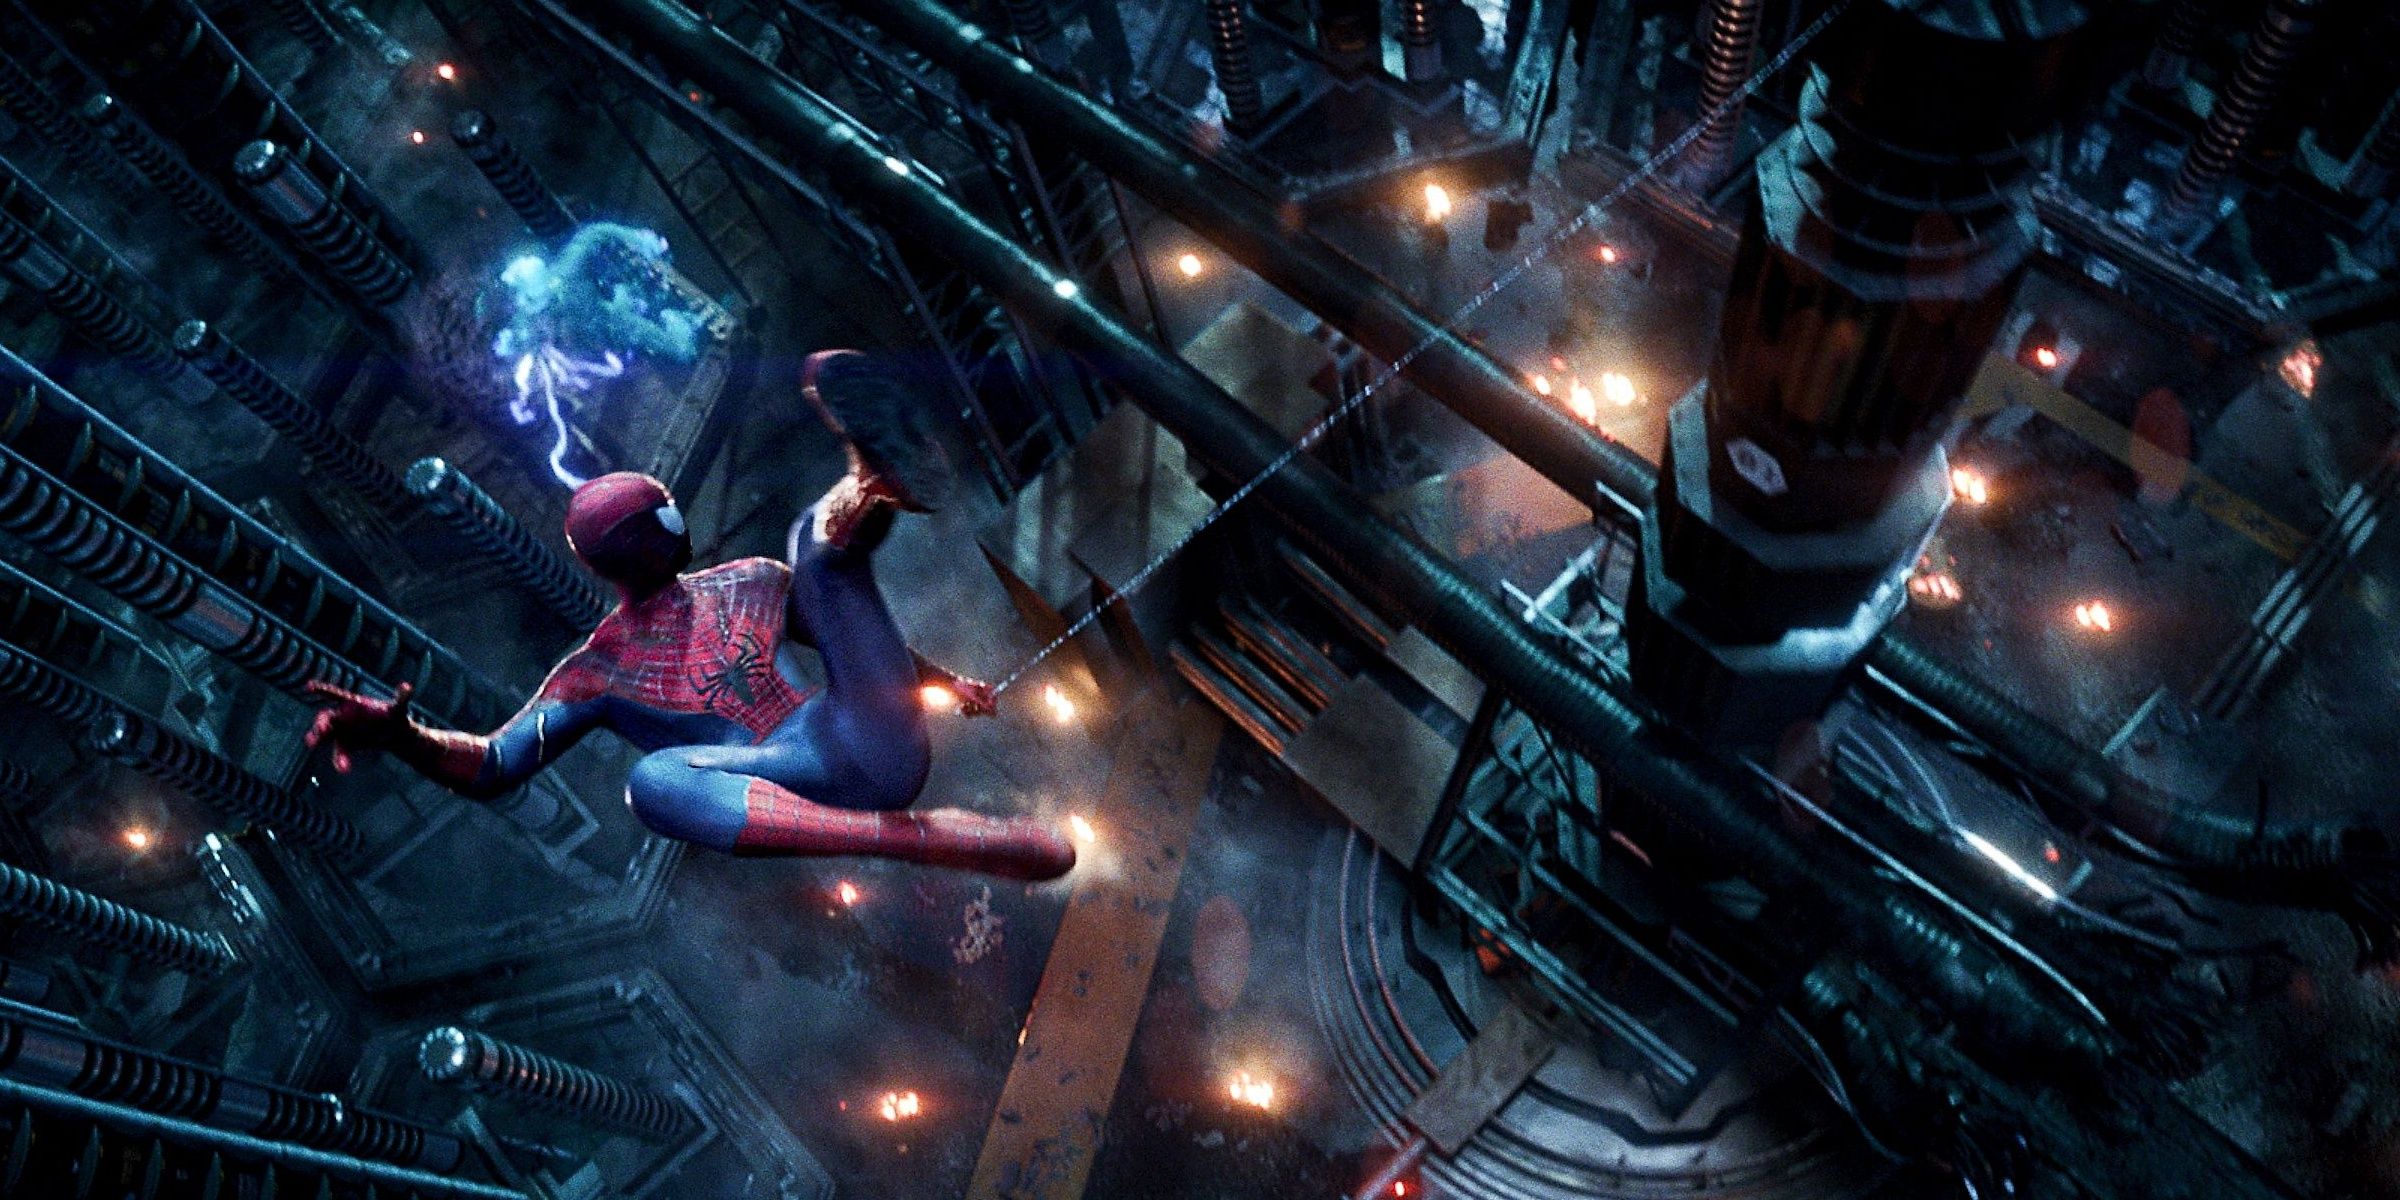 Spider-Man swings away from Electro in The Amazing Spider-Man 2